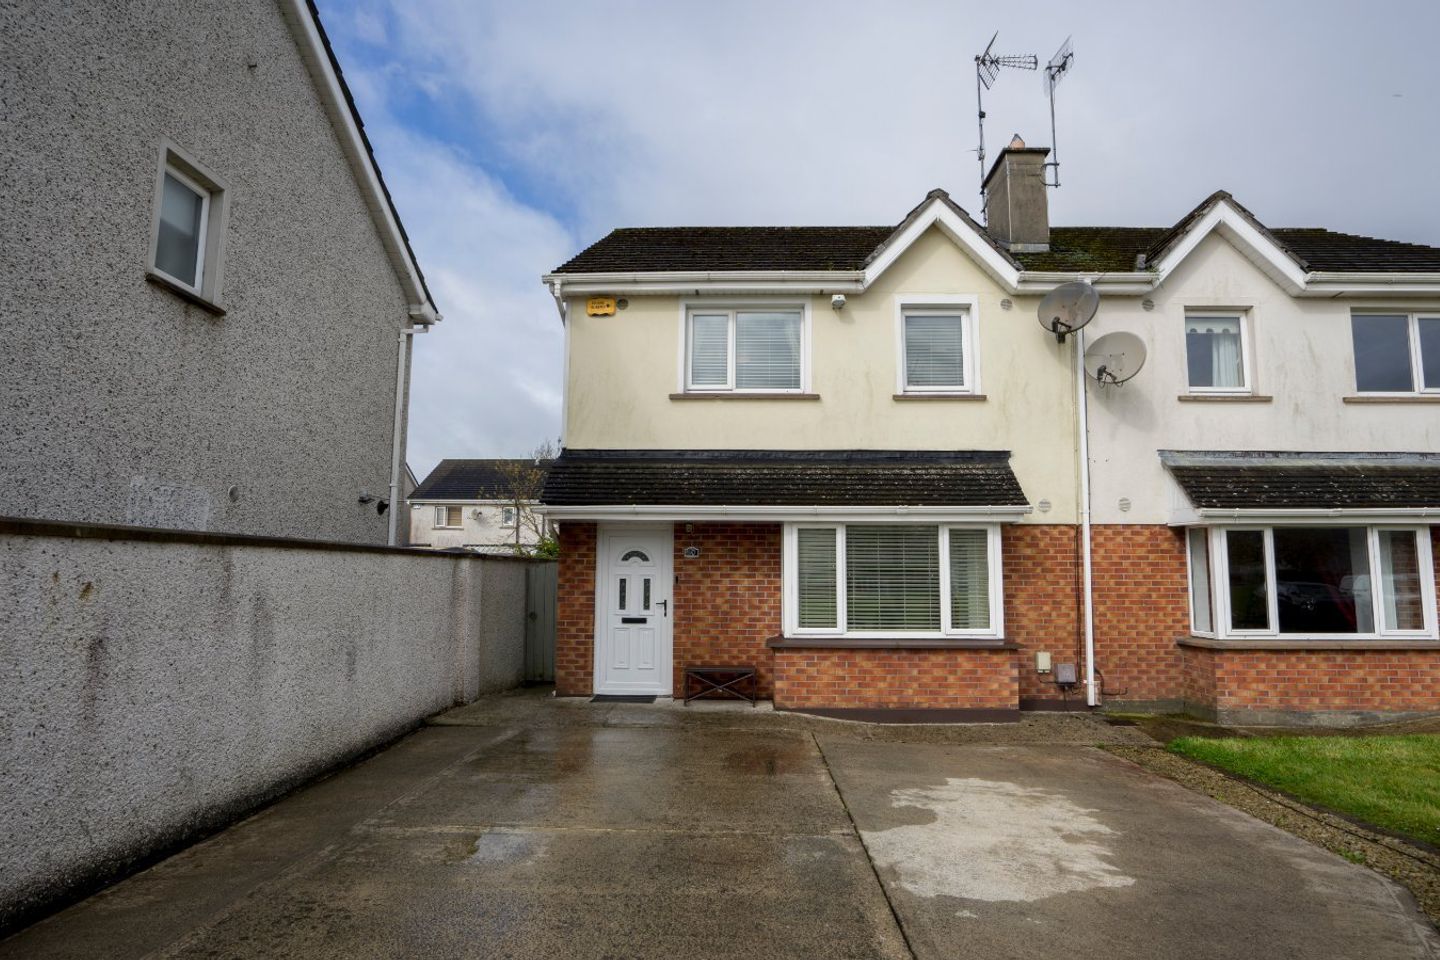 40 Riverside Drive, Red Barns Road, Dundalk, Louth, Co. Louth, A91X0E1